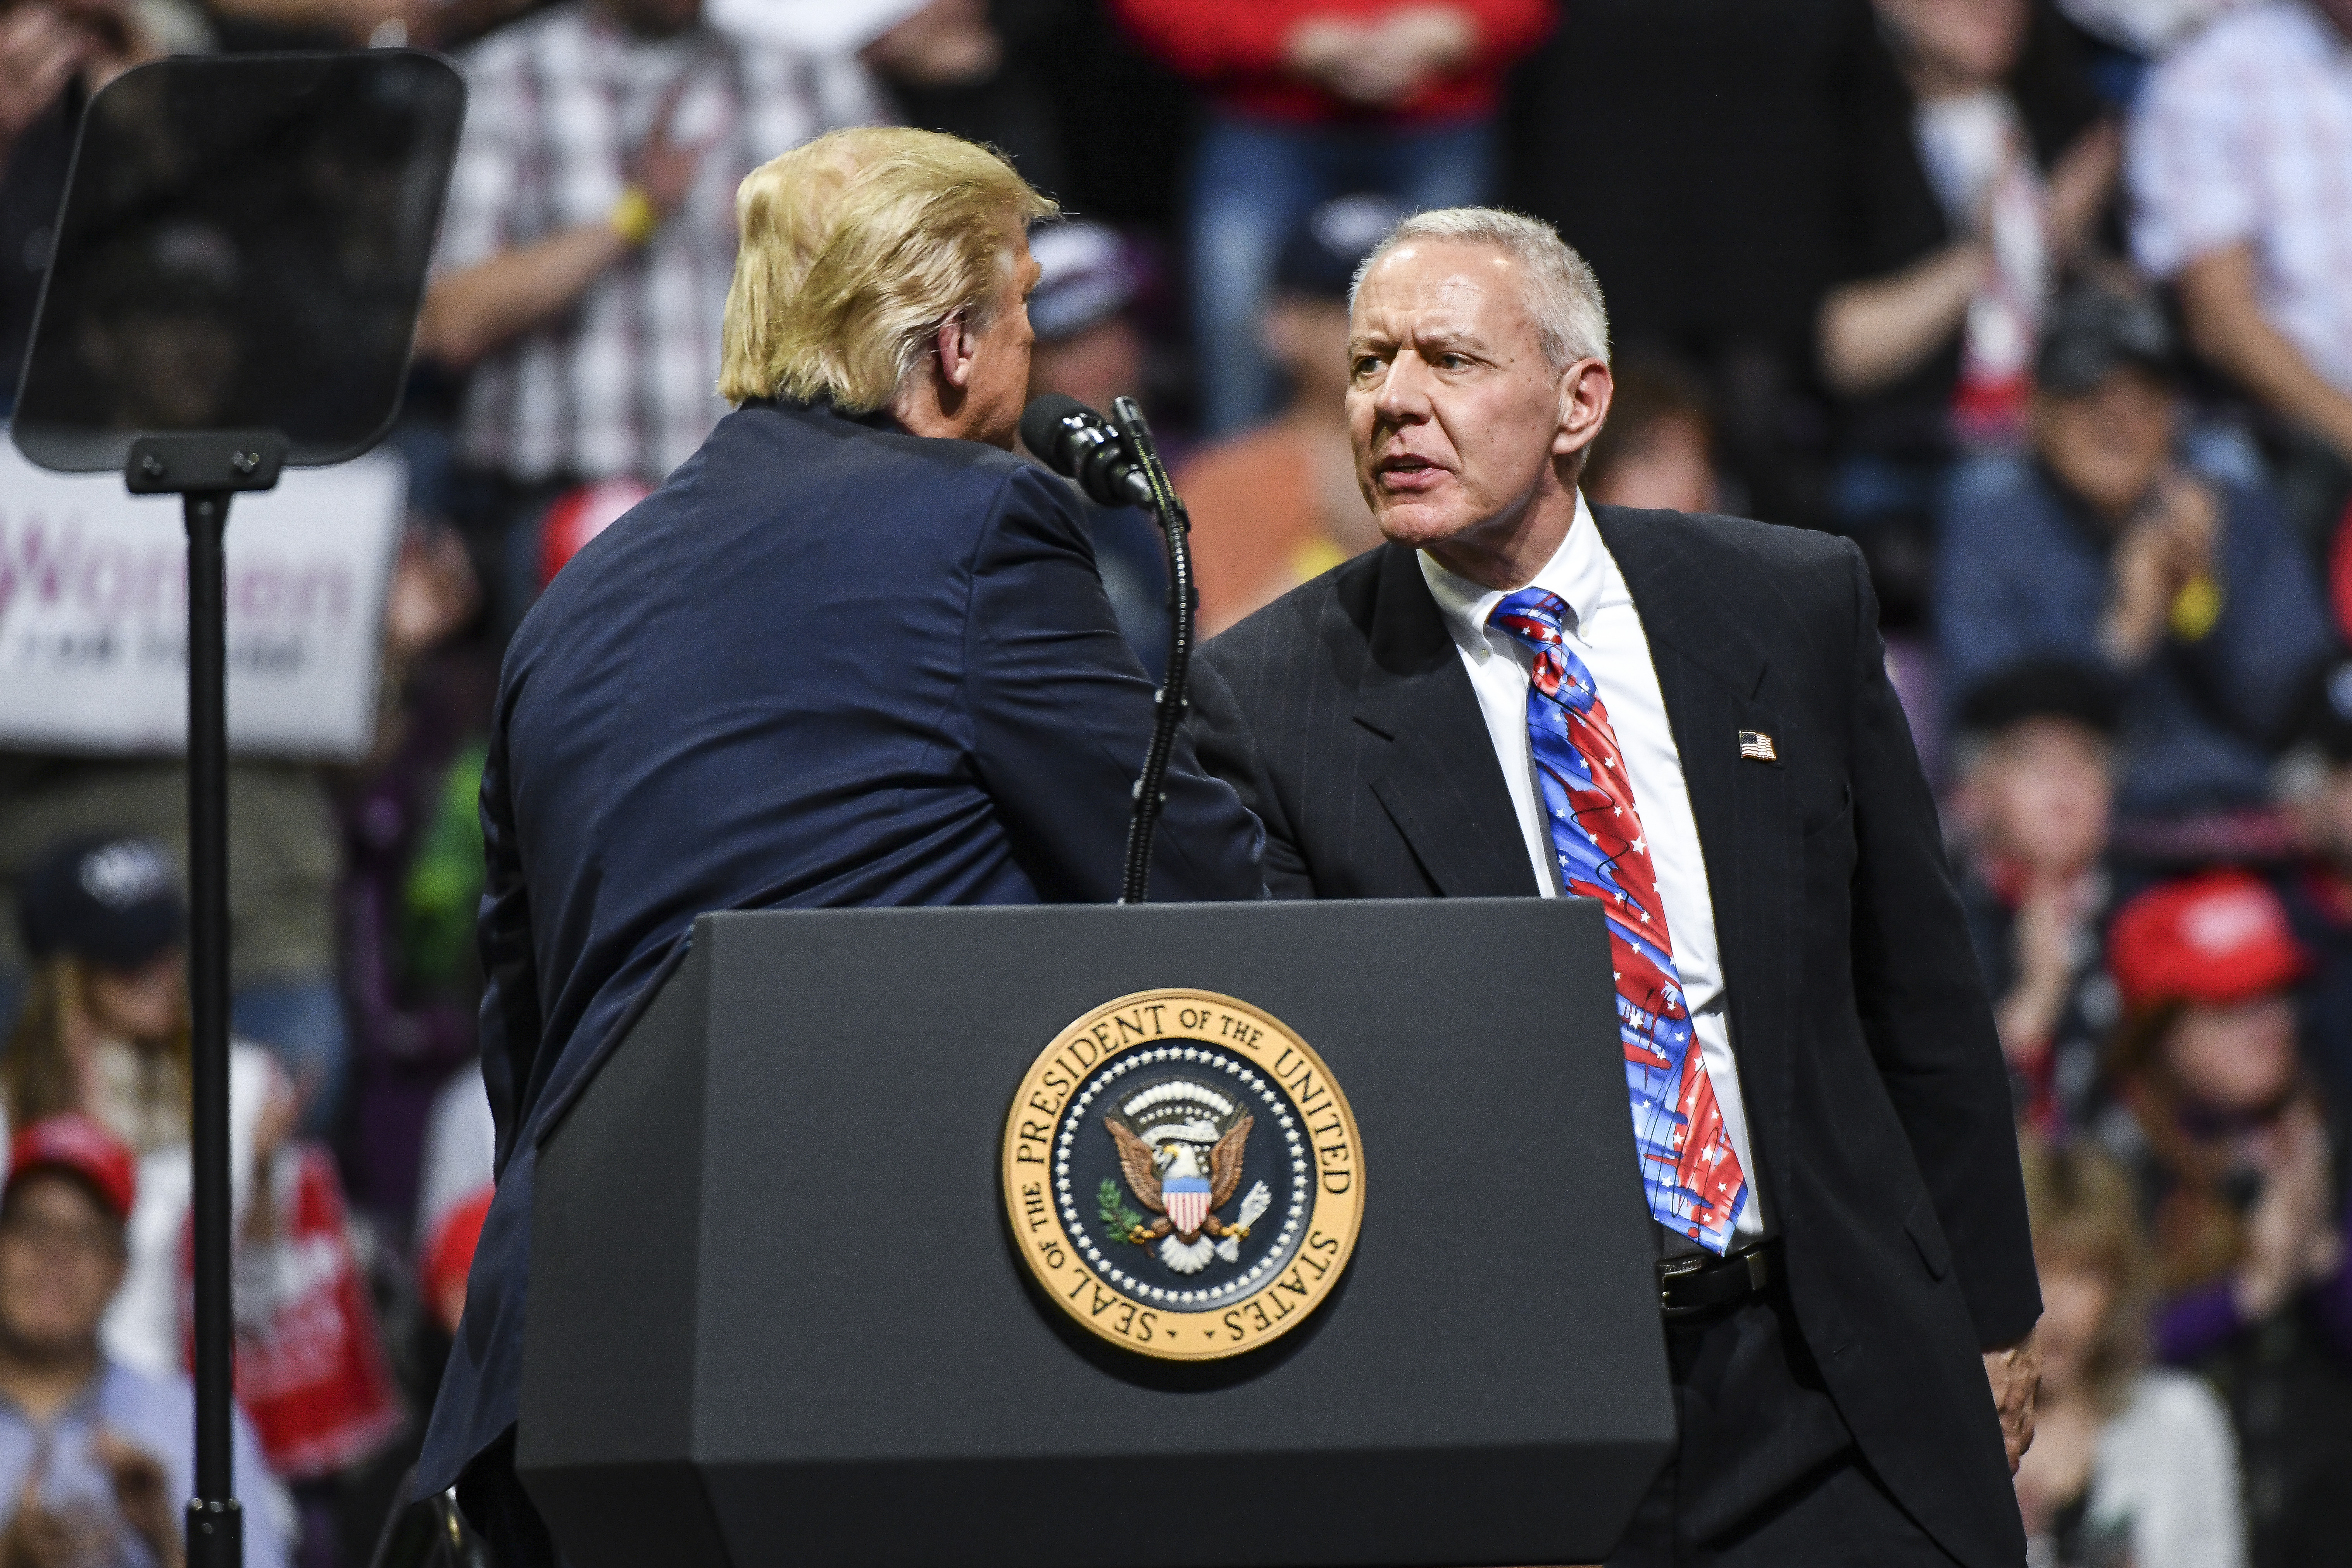 Rep. Ken Buck shakes hands with President Donald Trump on stage during a Keep America Great rally on Feb. 20, 2020 in Colorado Springs.